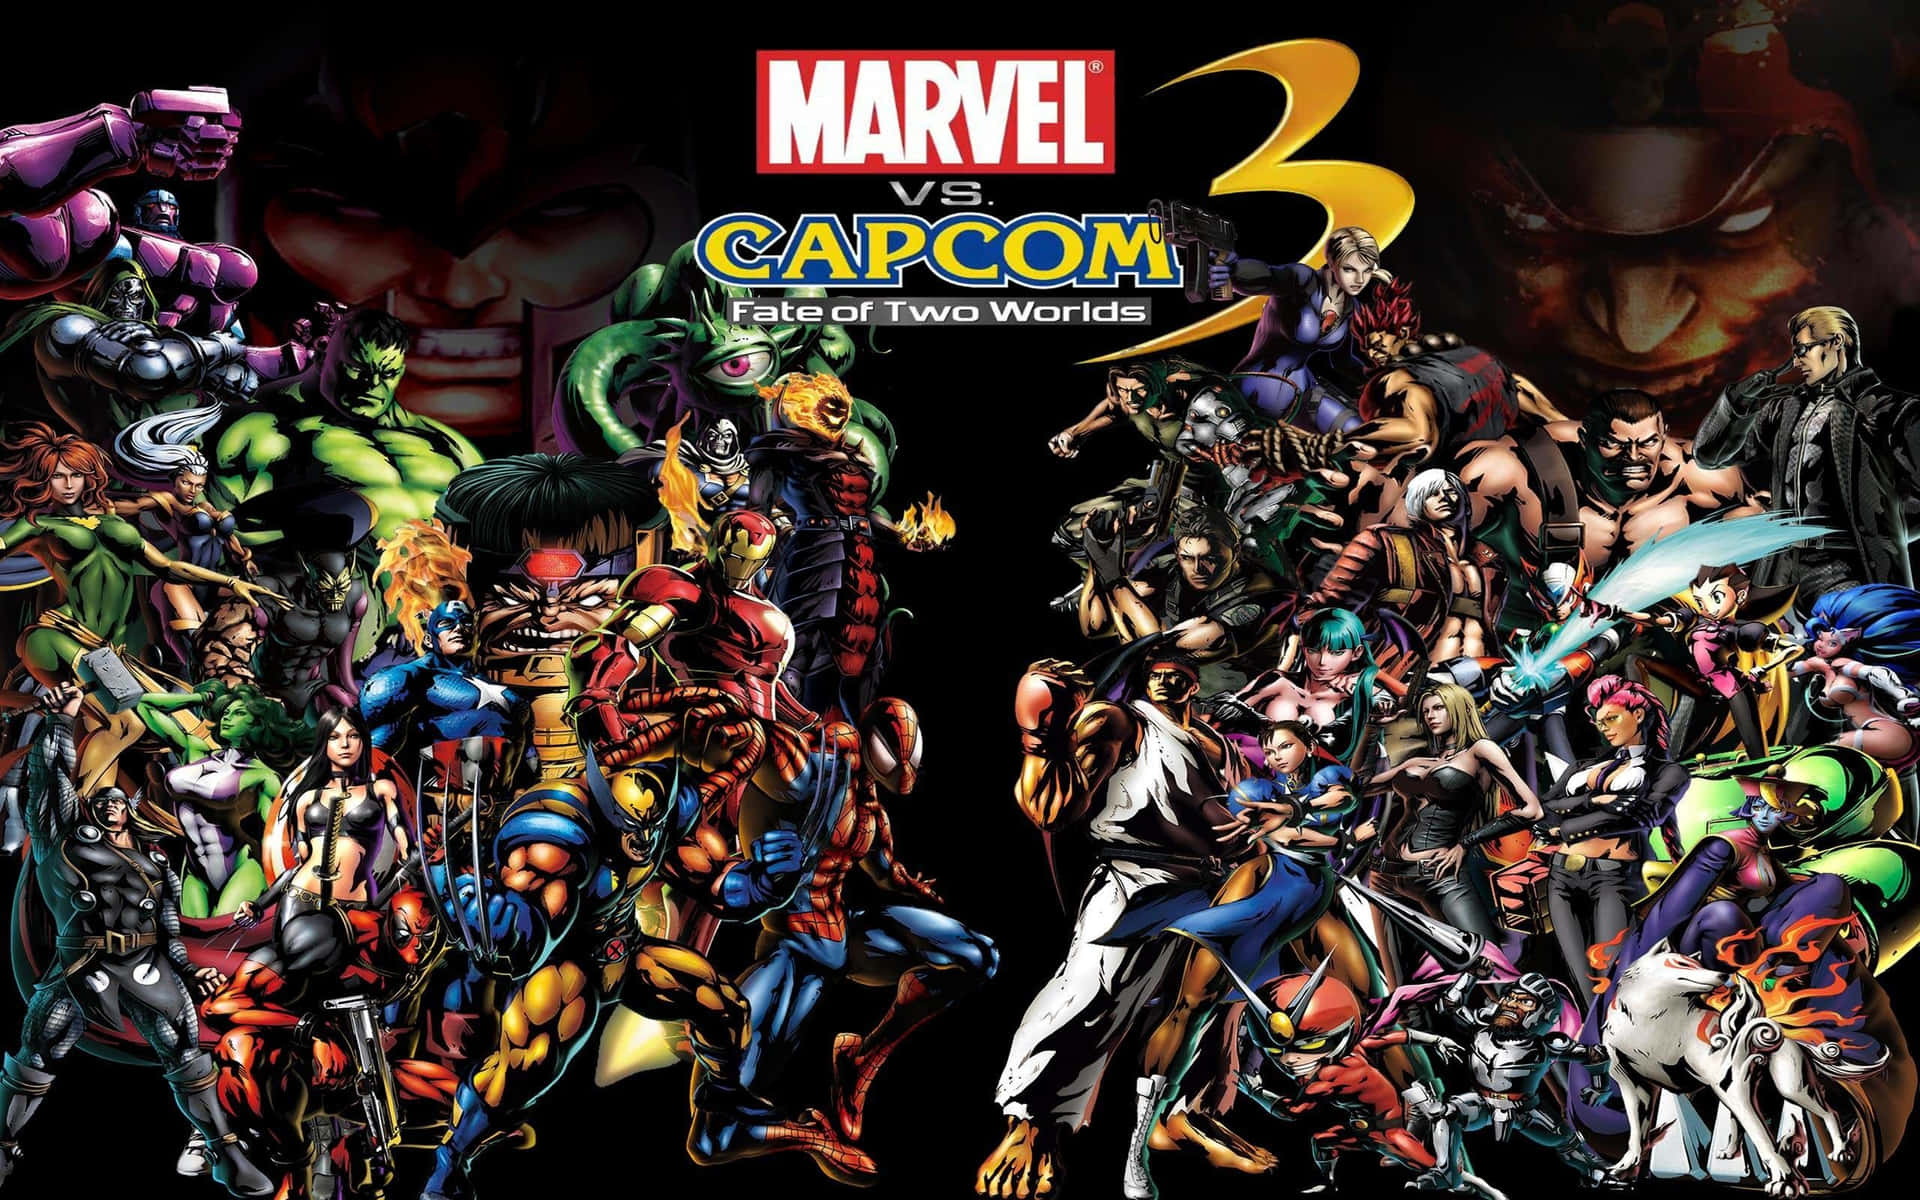 Epic Battle Between Marvel and Capcom Characters in High Definition Wallpaper